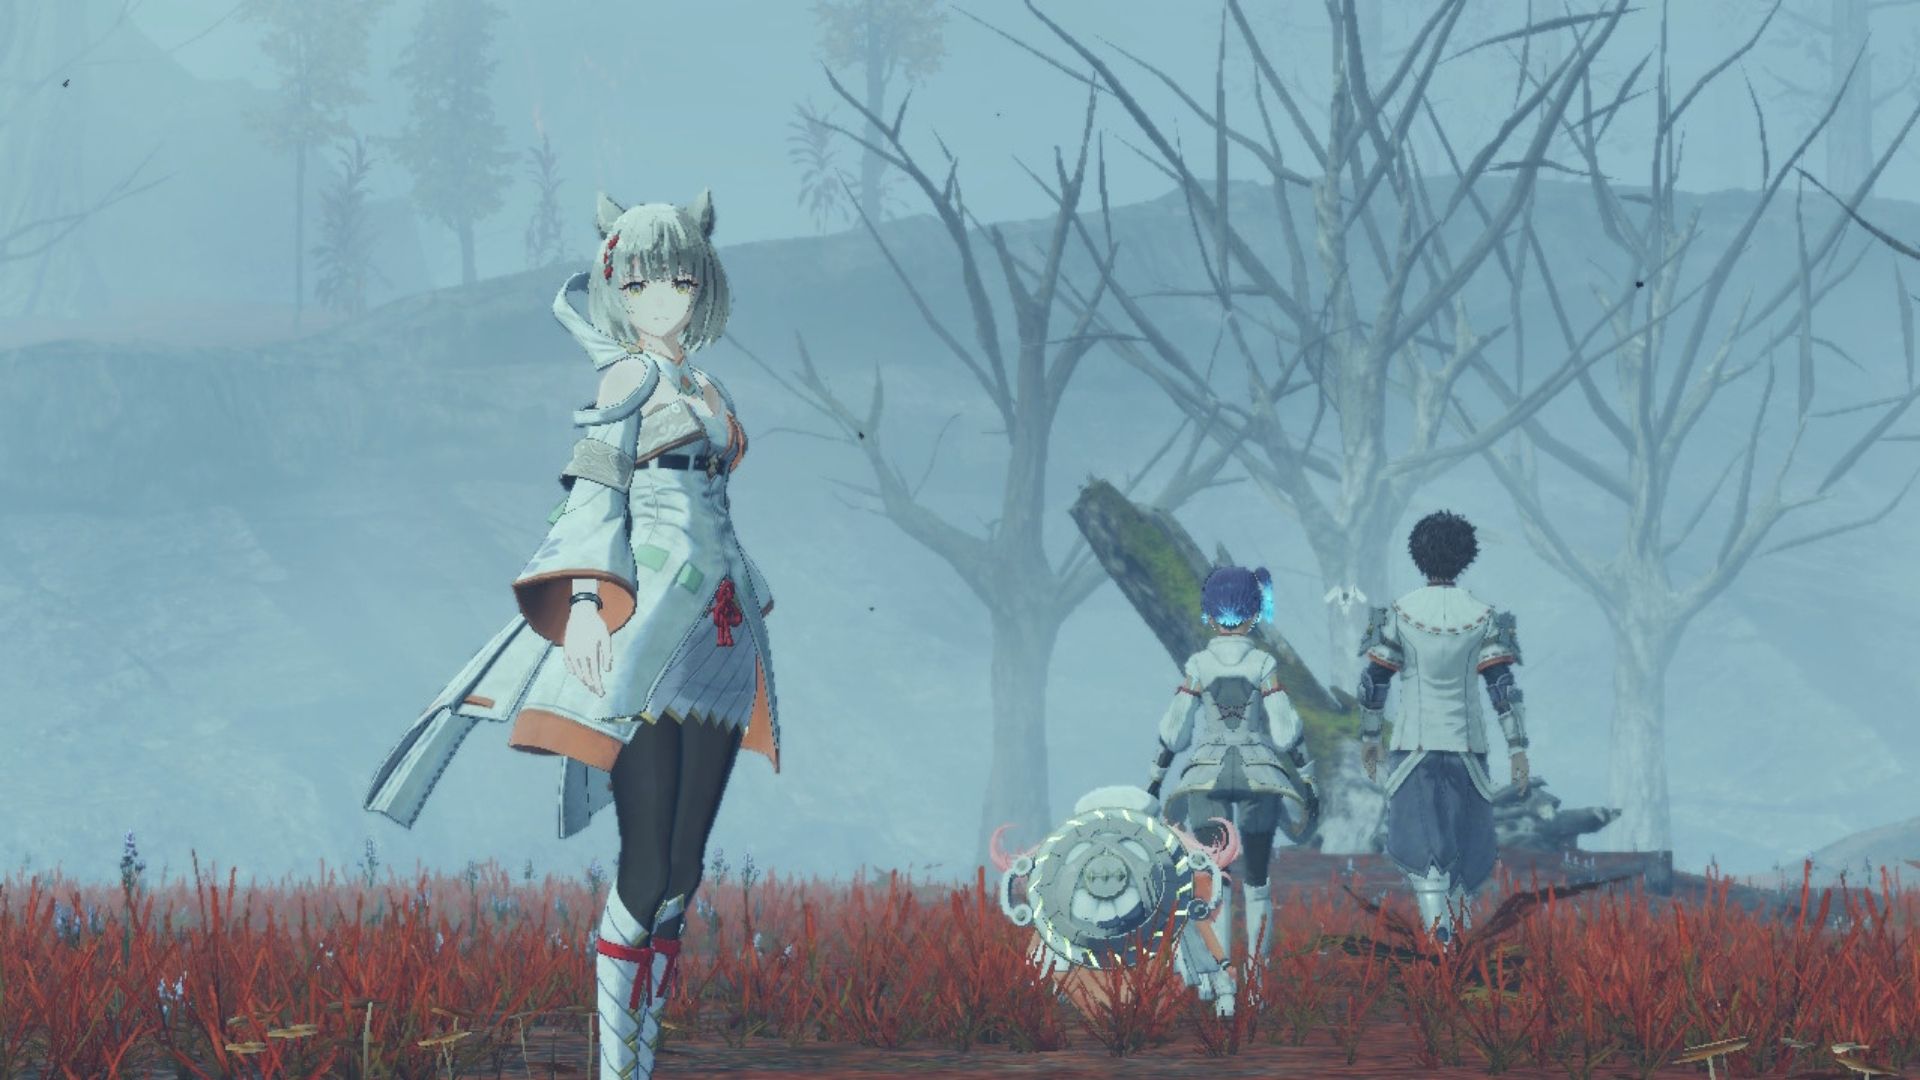 Round Up: The Reviews Are In For Xenoblade Chronicles 3